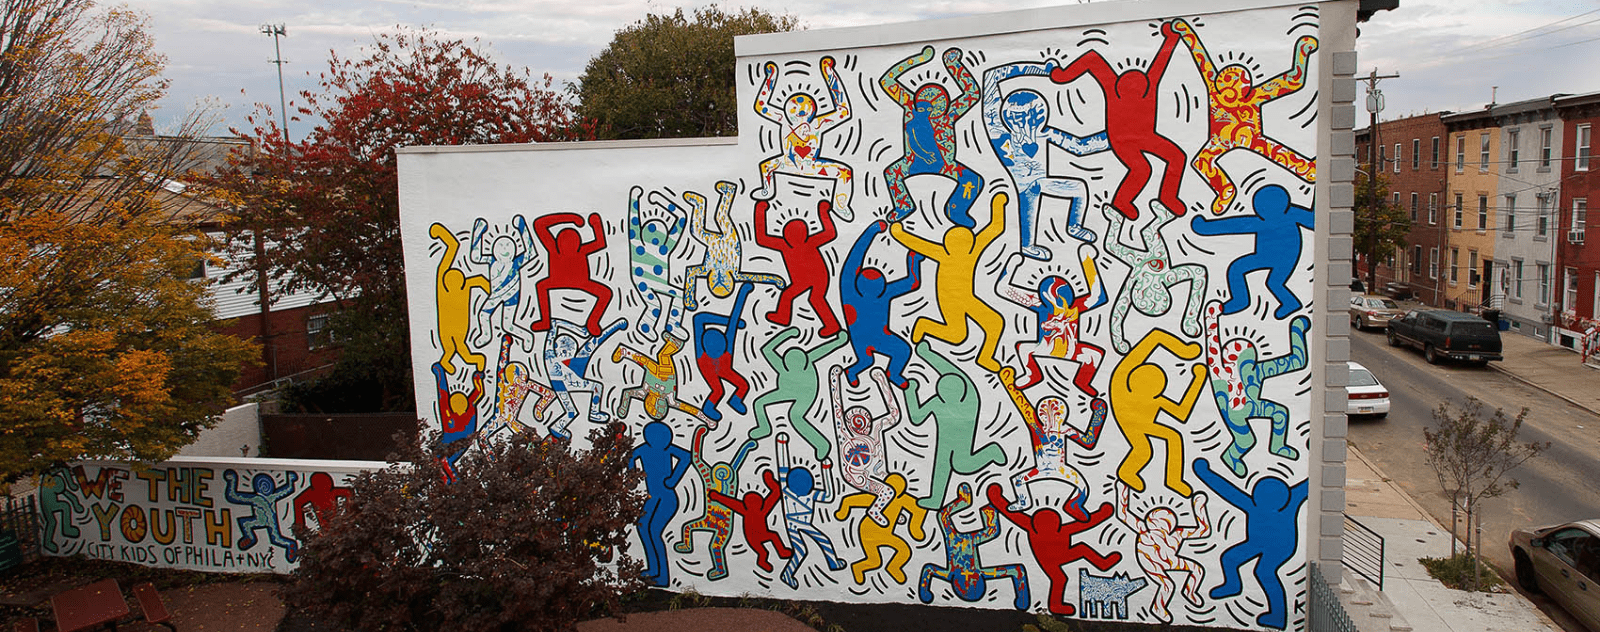 We The Youth Keith Haring